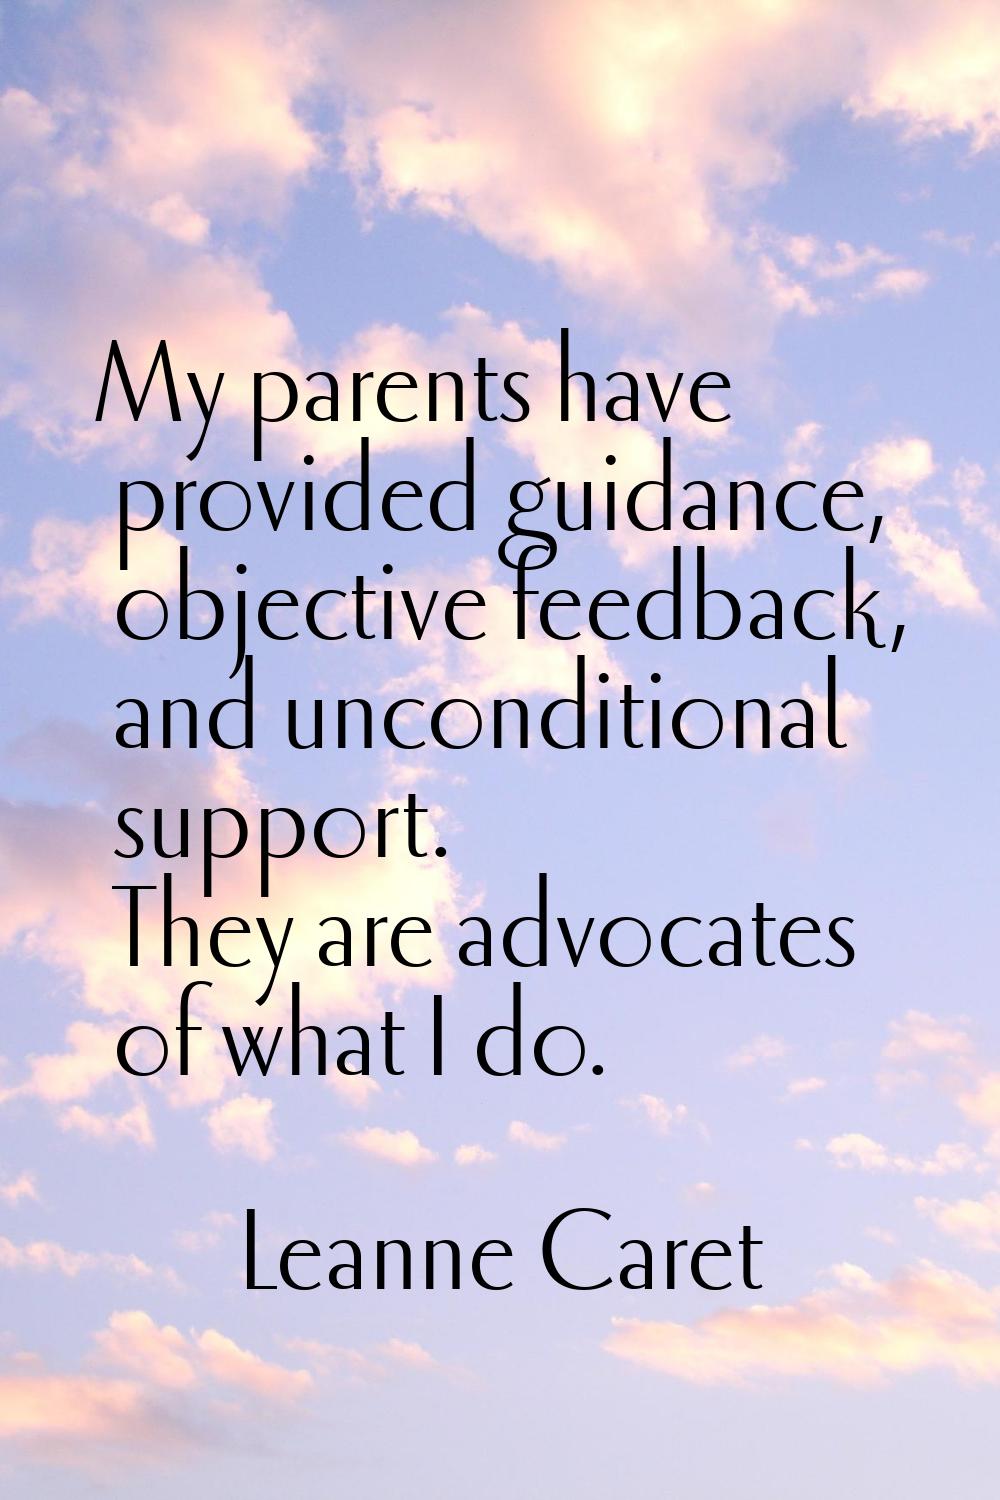 My parents have provided guidance, objective feedback, and unconditional support. They are advocate